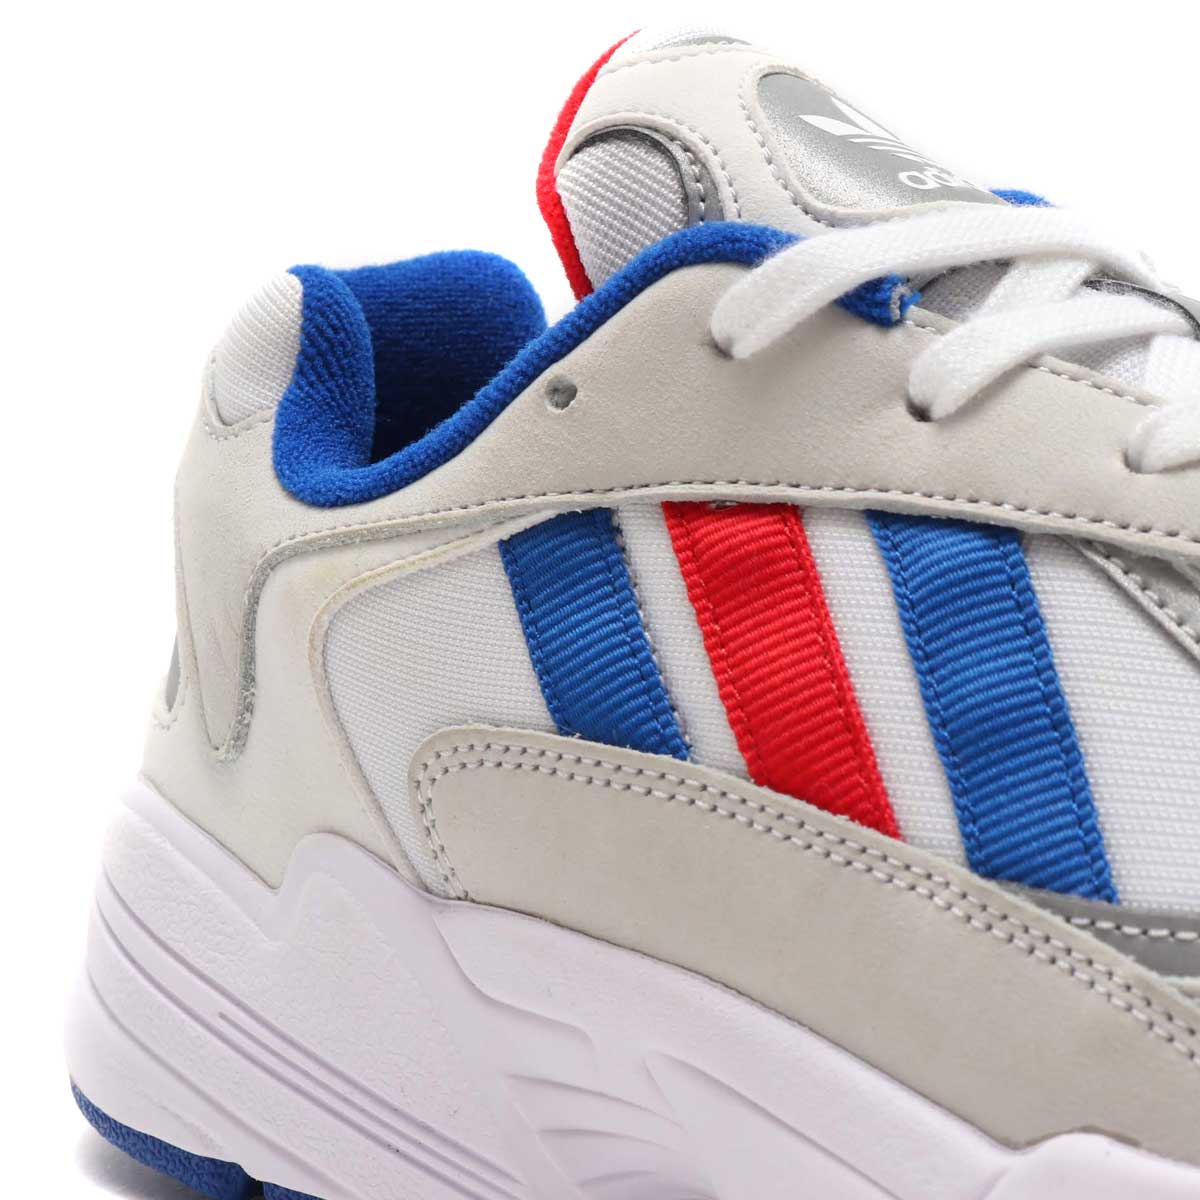 atmos adidas Yung-1 Barber Shop EF2674 Release Date